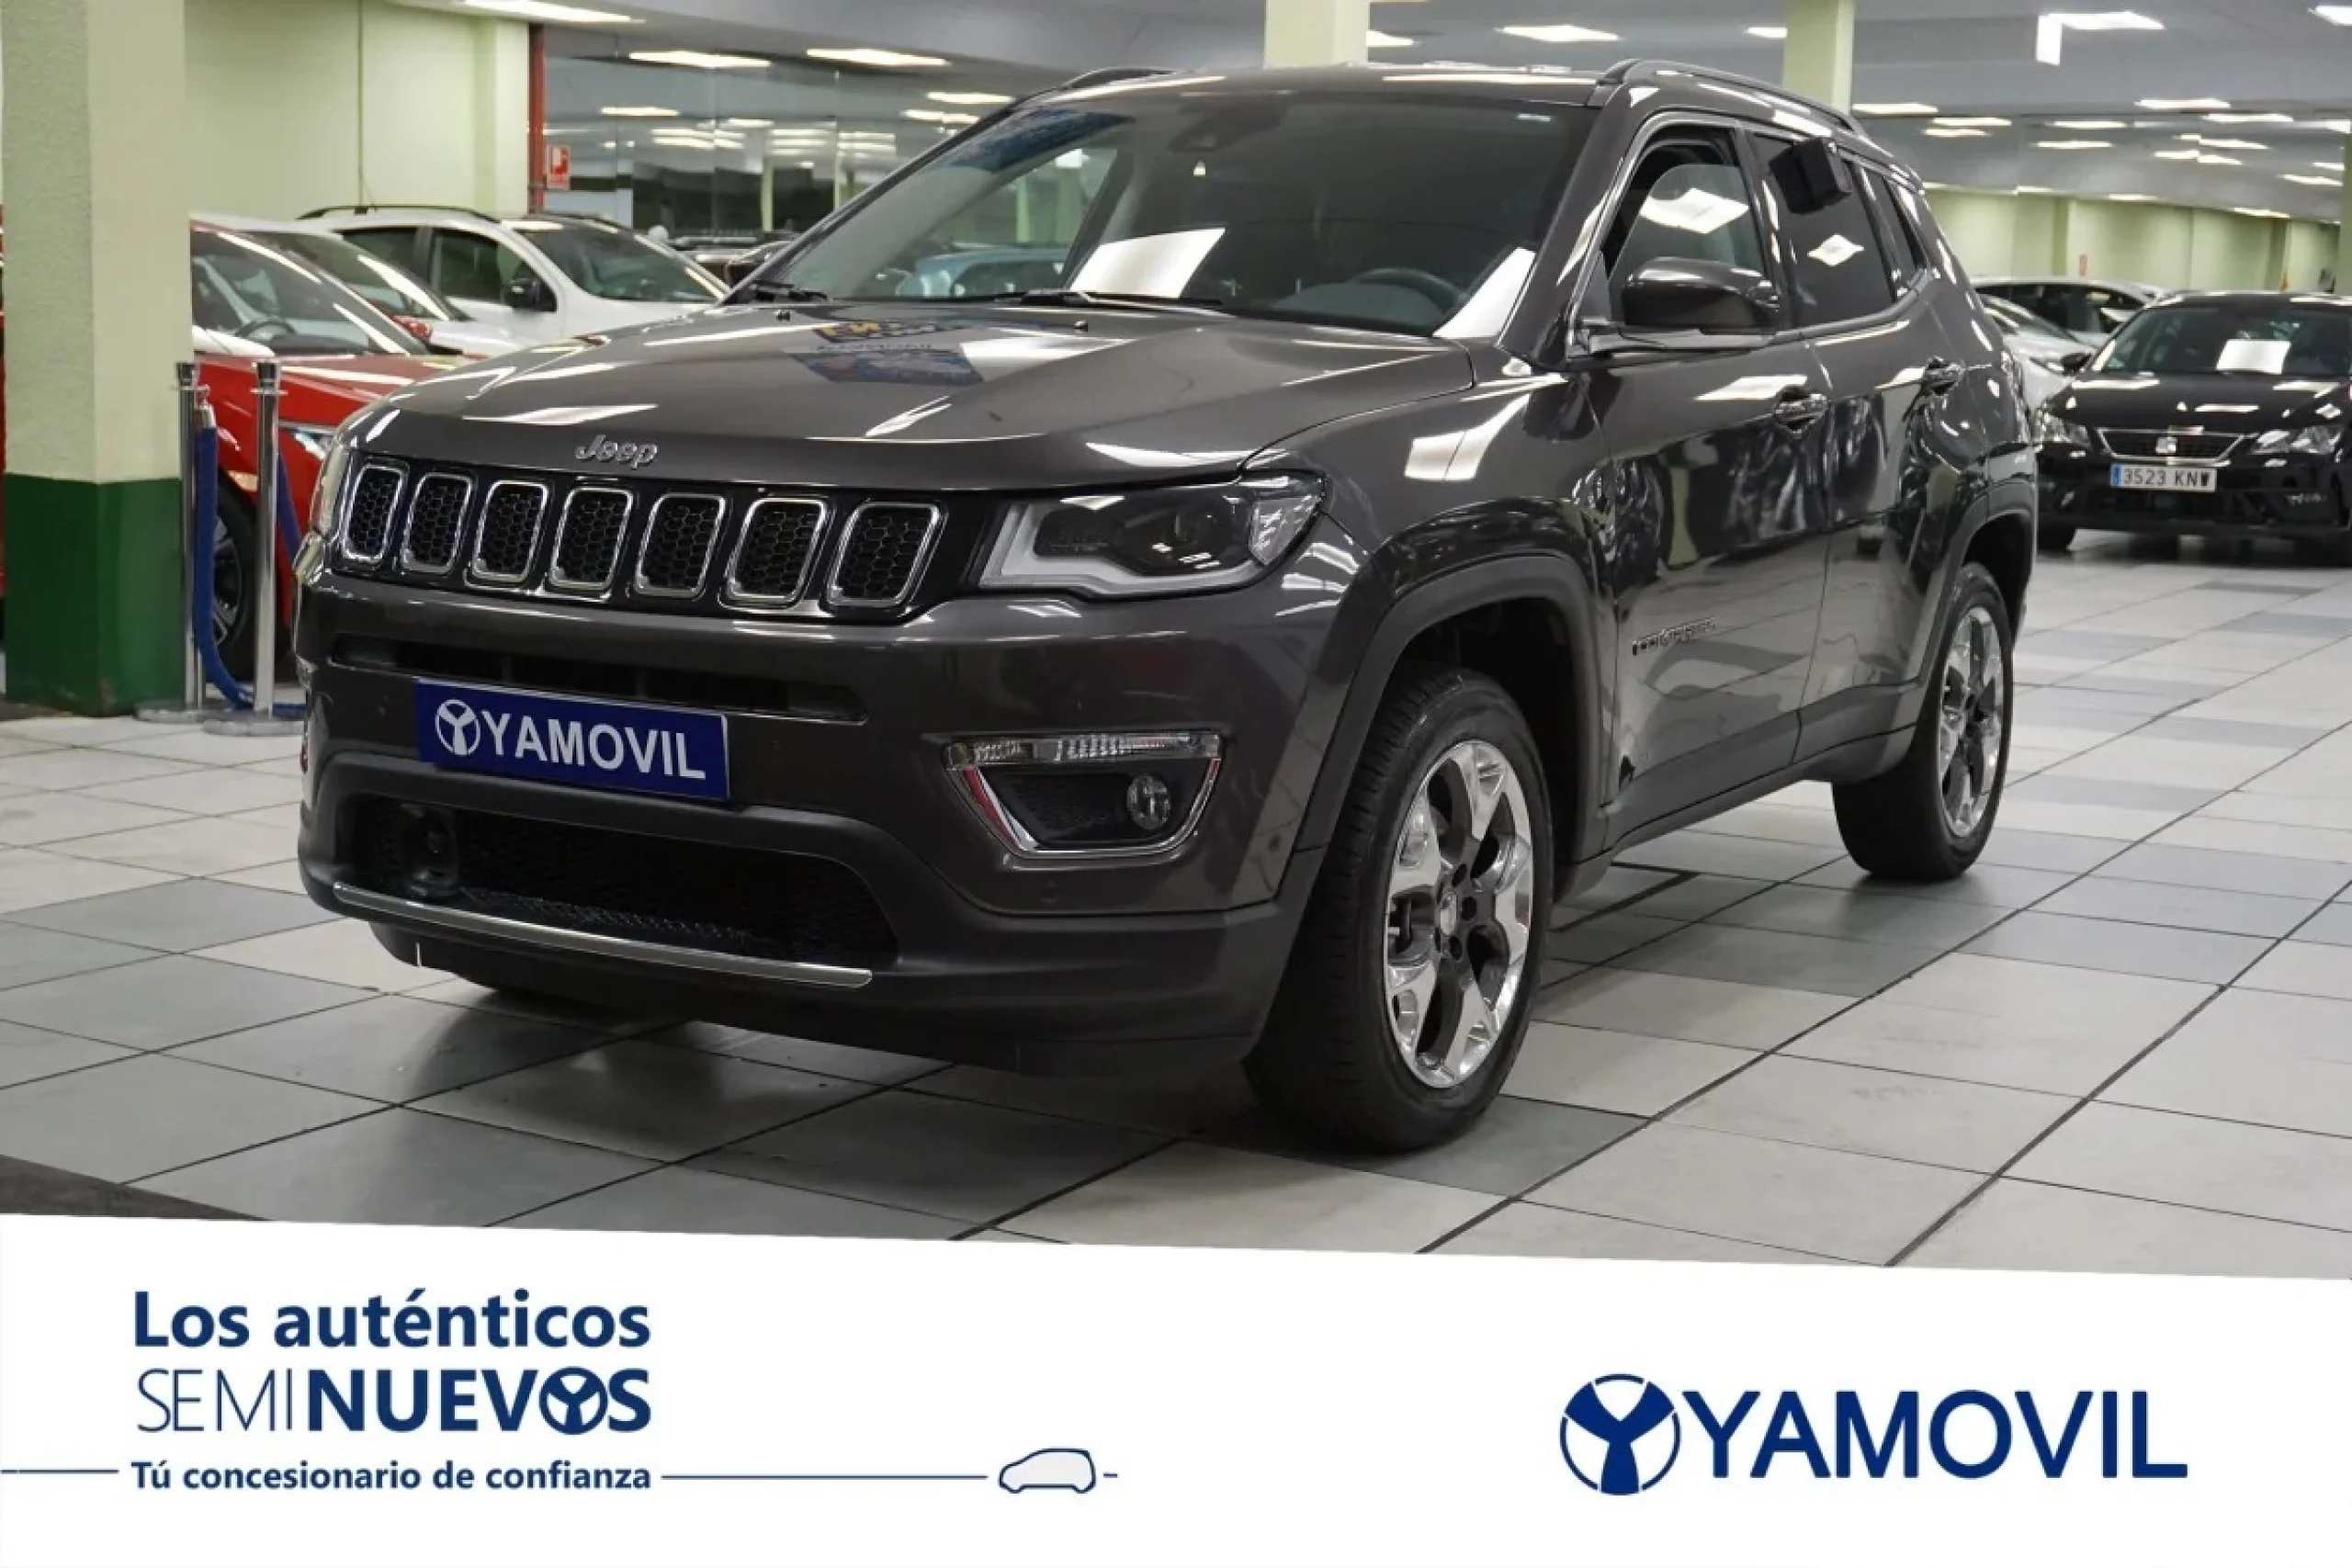 Jeep Compass 1.4 Multiair Limited 4x4 AD Auto 125 kW (170 CV) - Foto 1